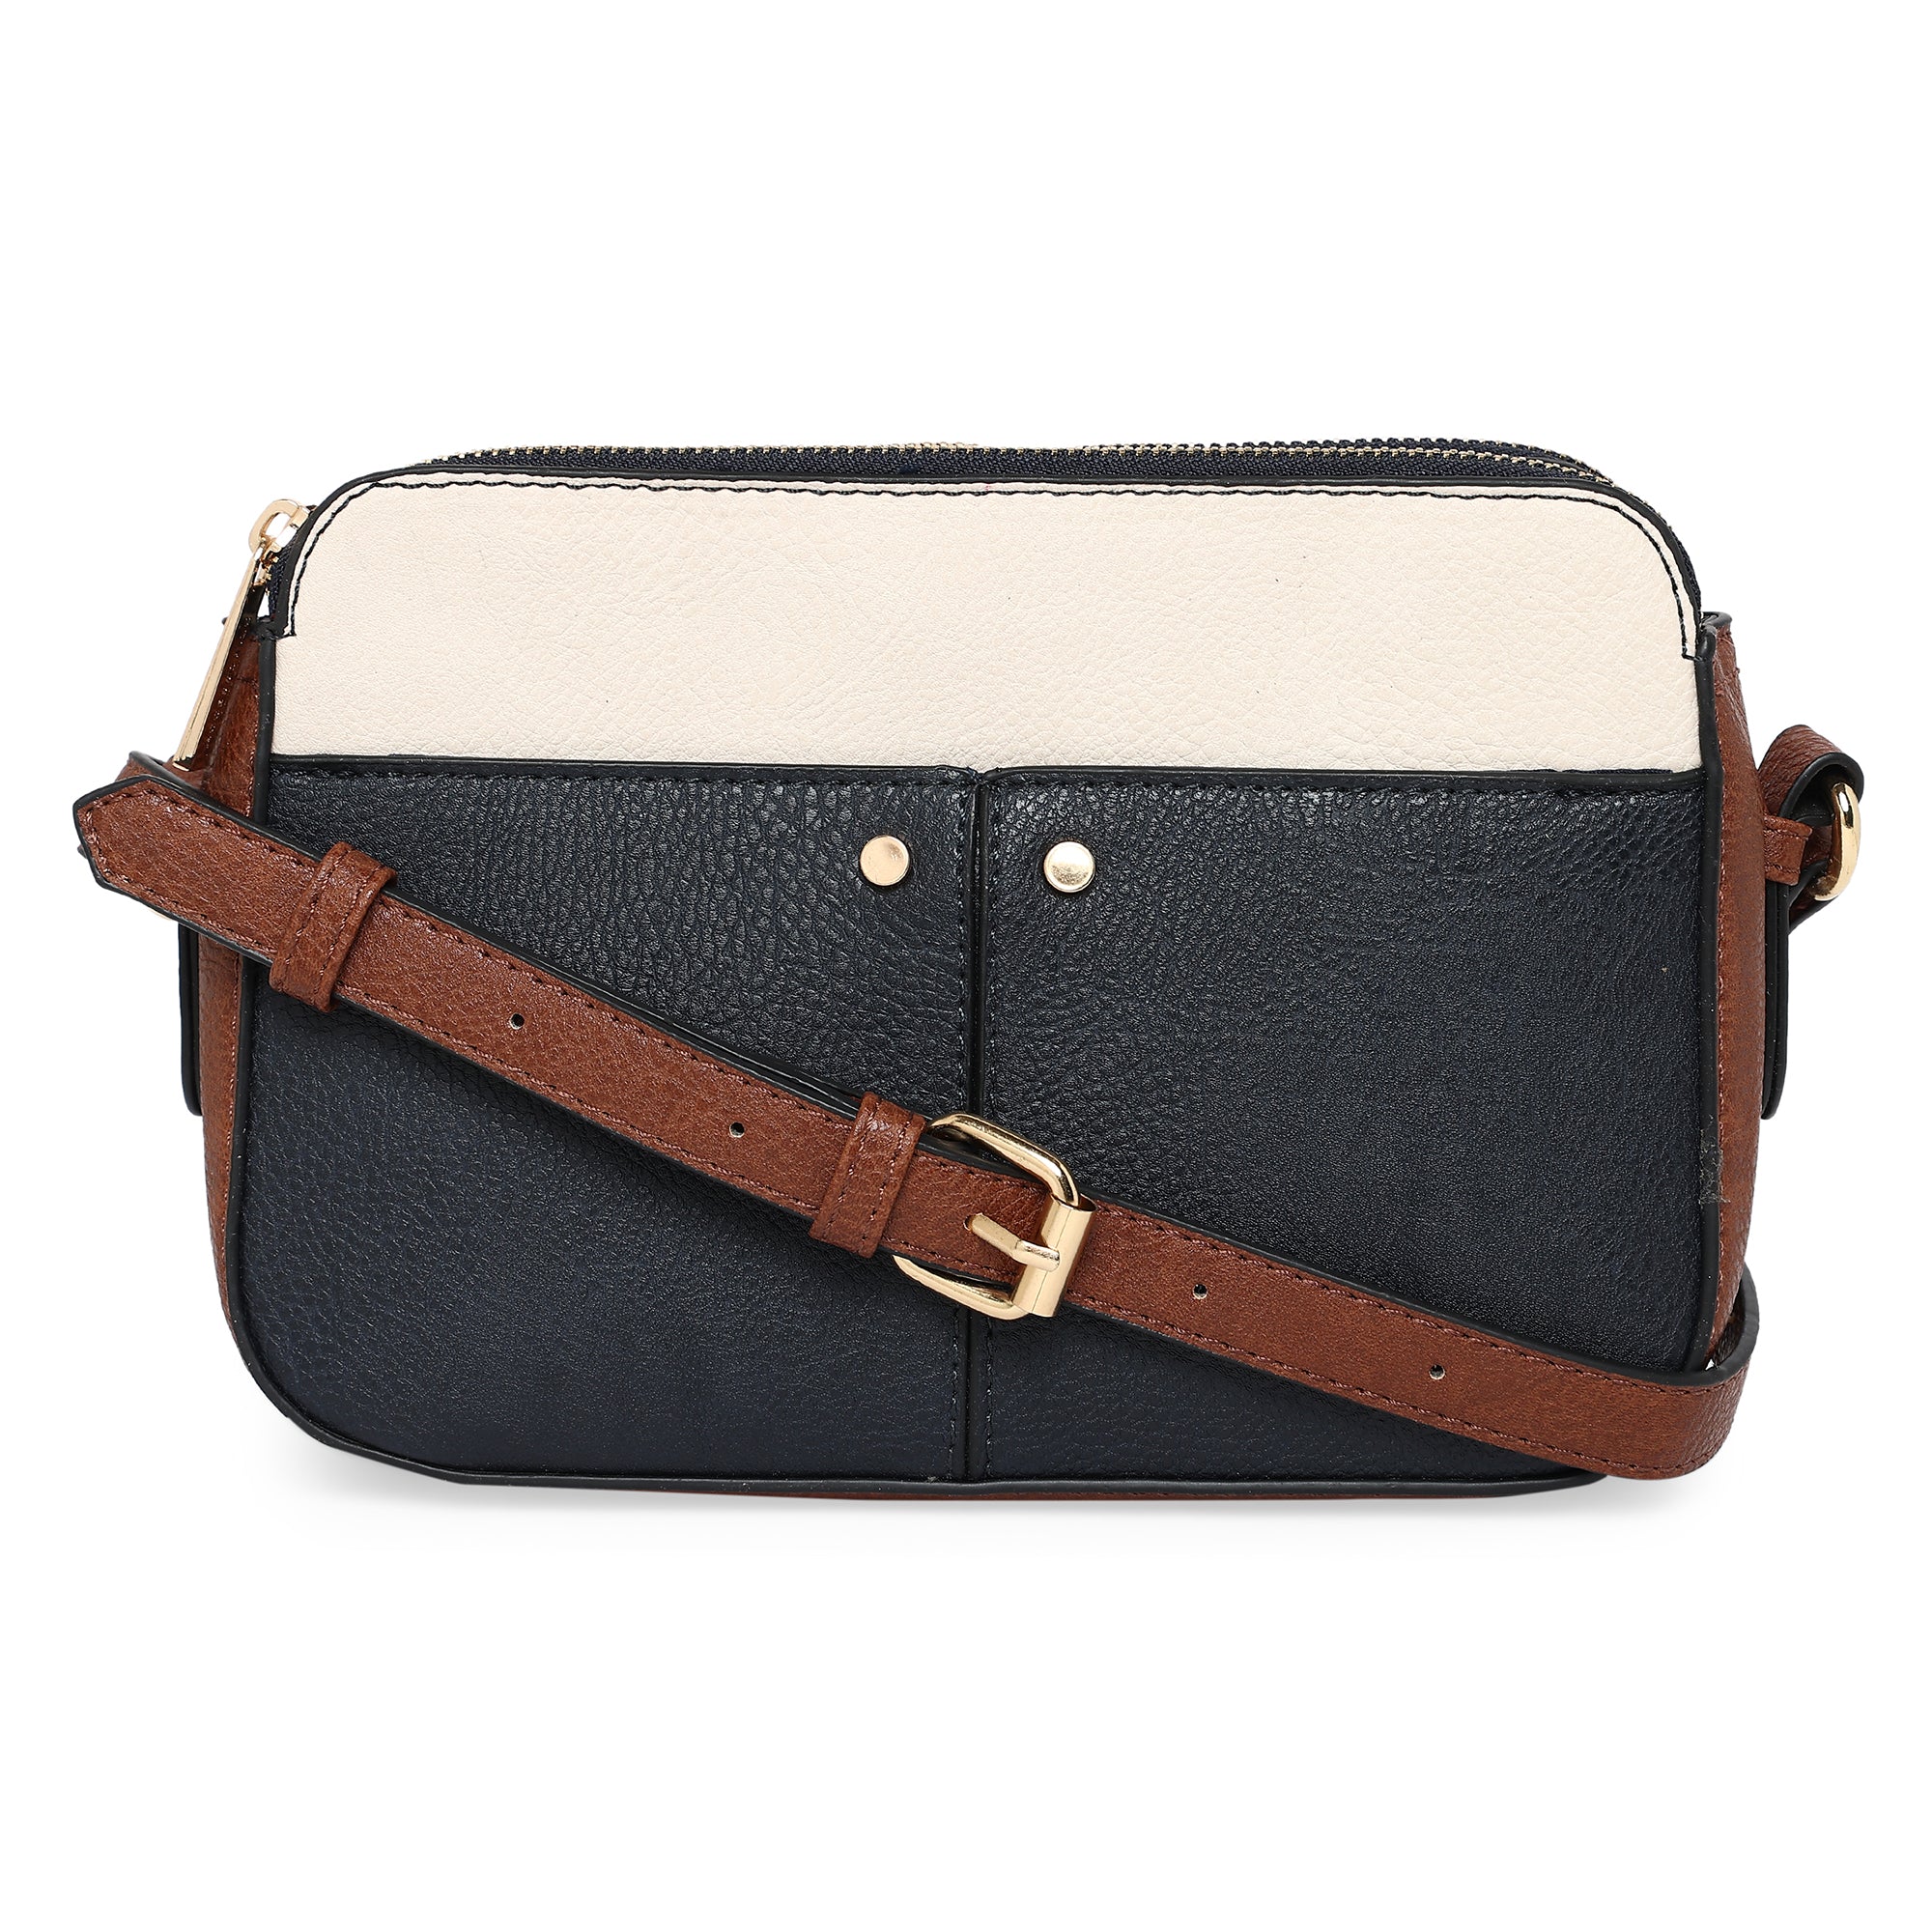 Classic Purse Terrida - Handmade in Italy, vegetable tanned leather